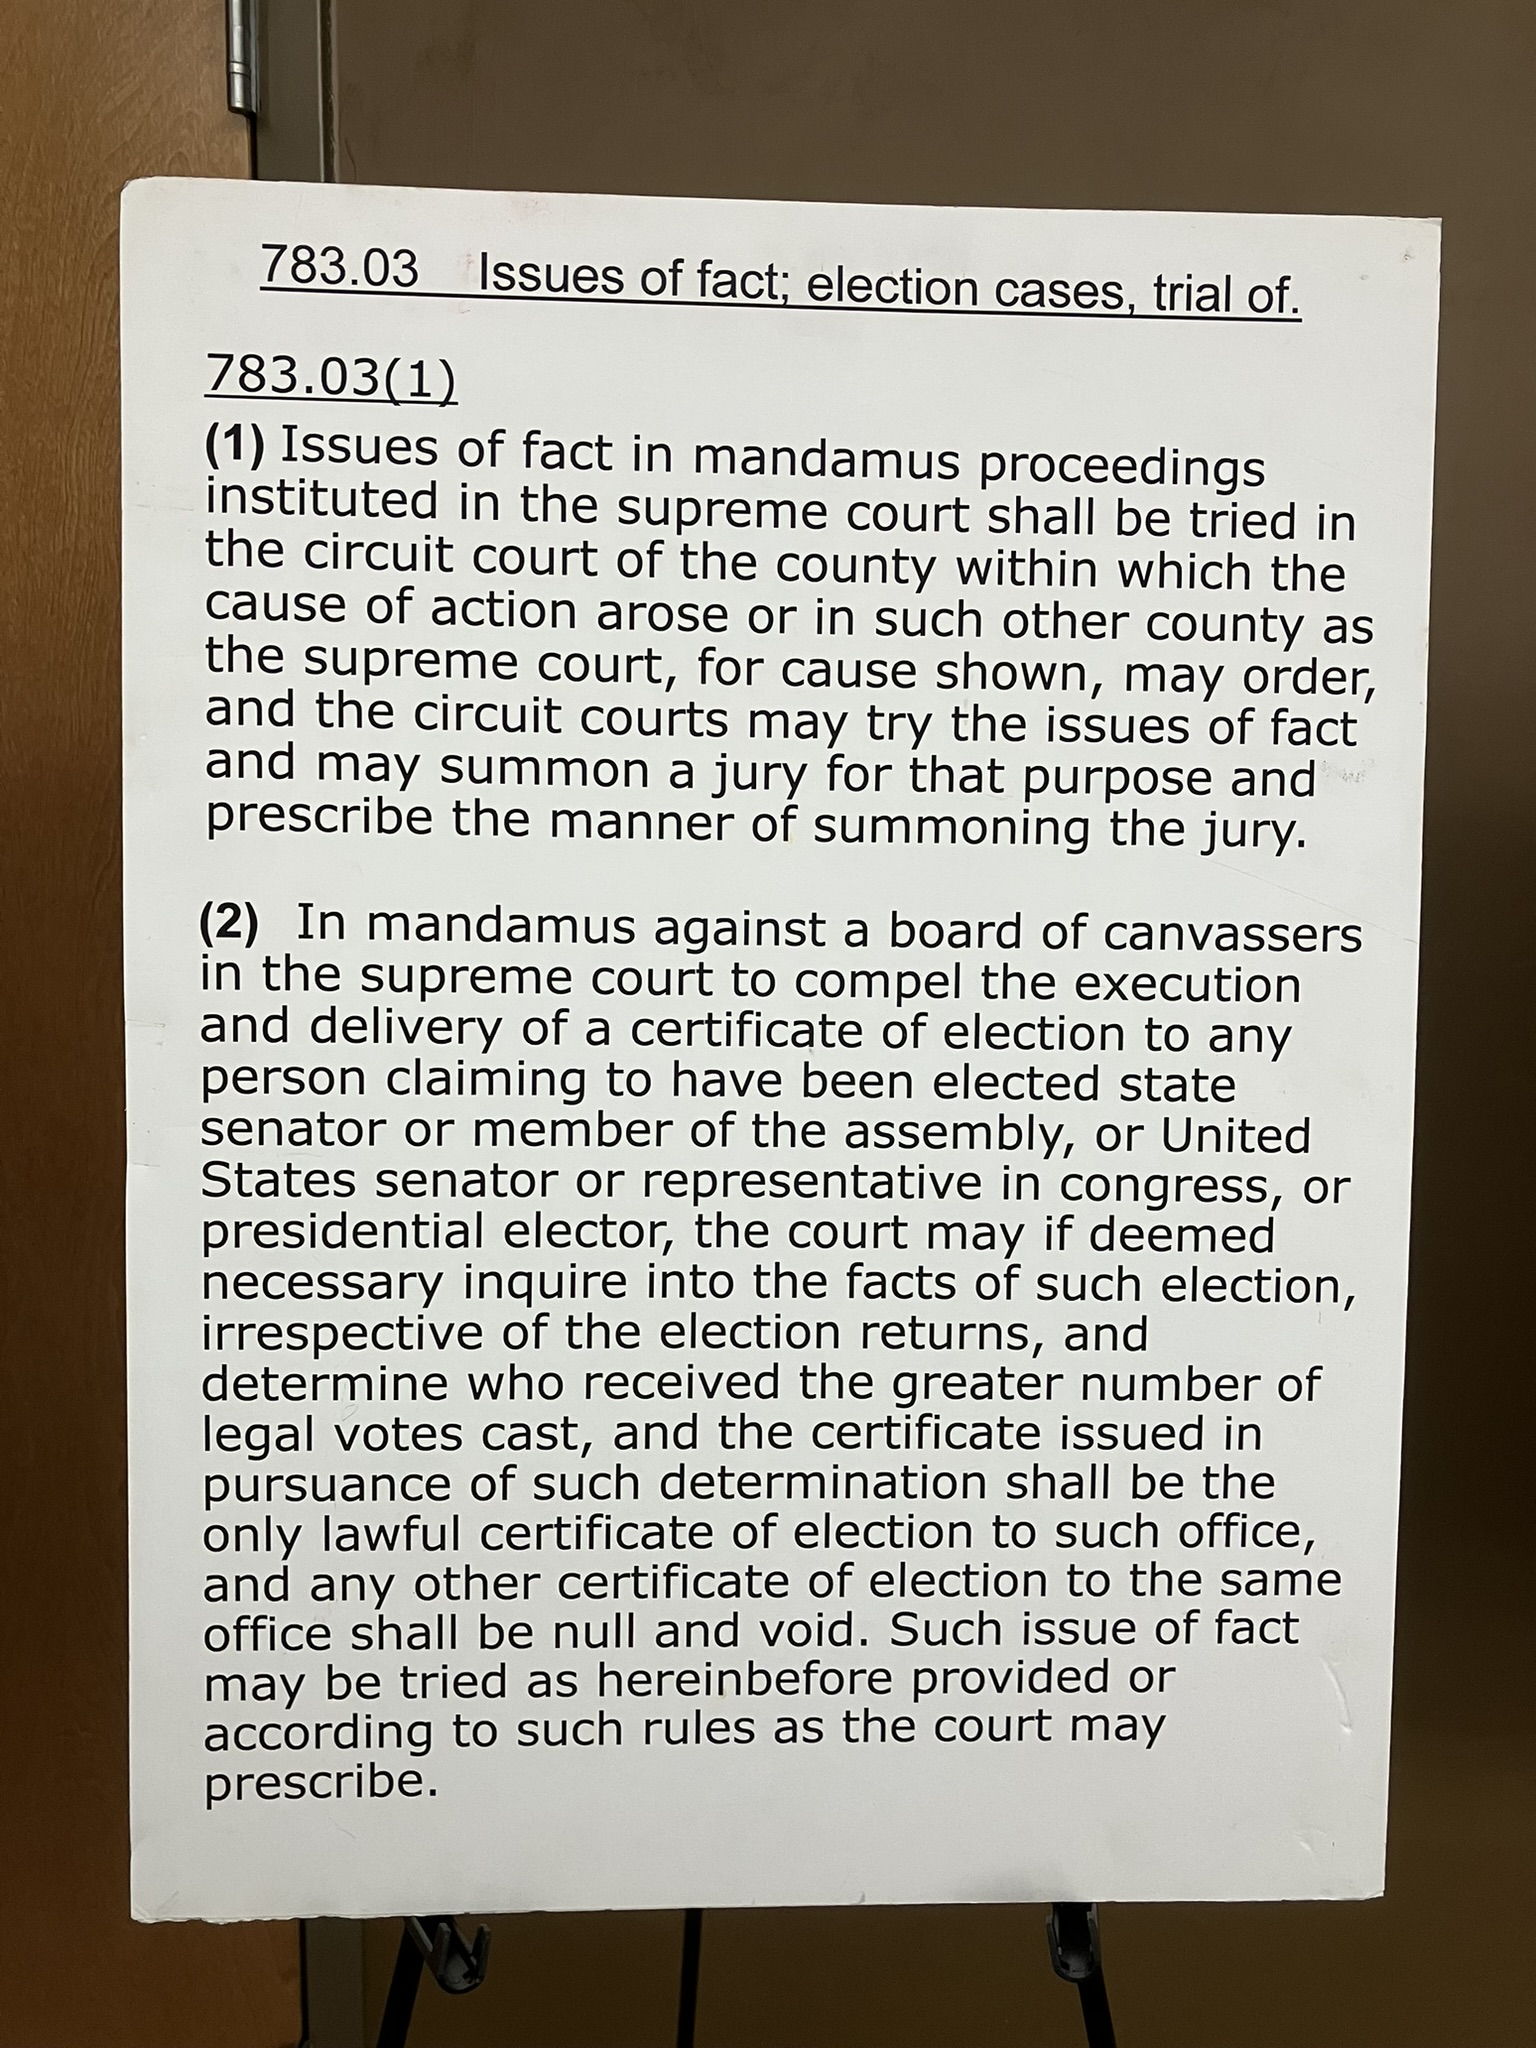 Text of Wisconsin state statutes concerning certification of elections.